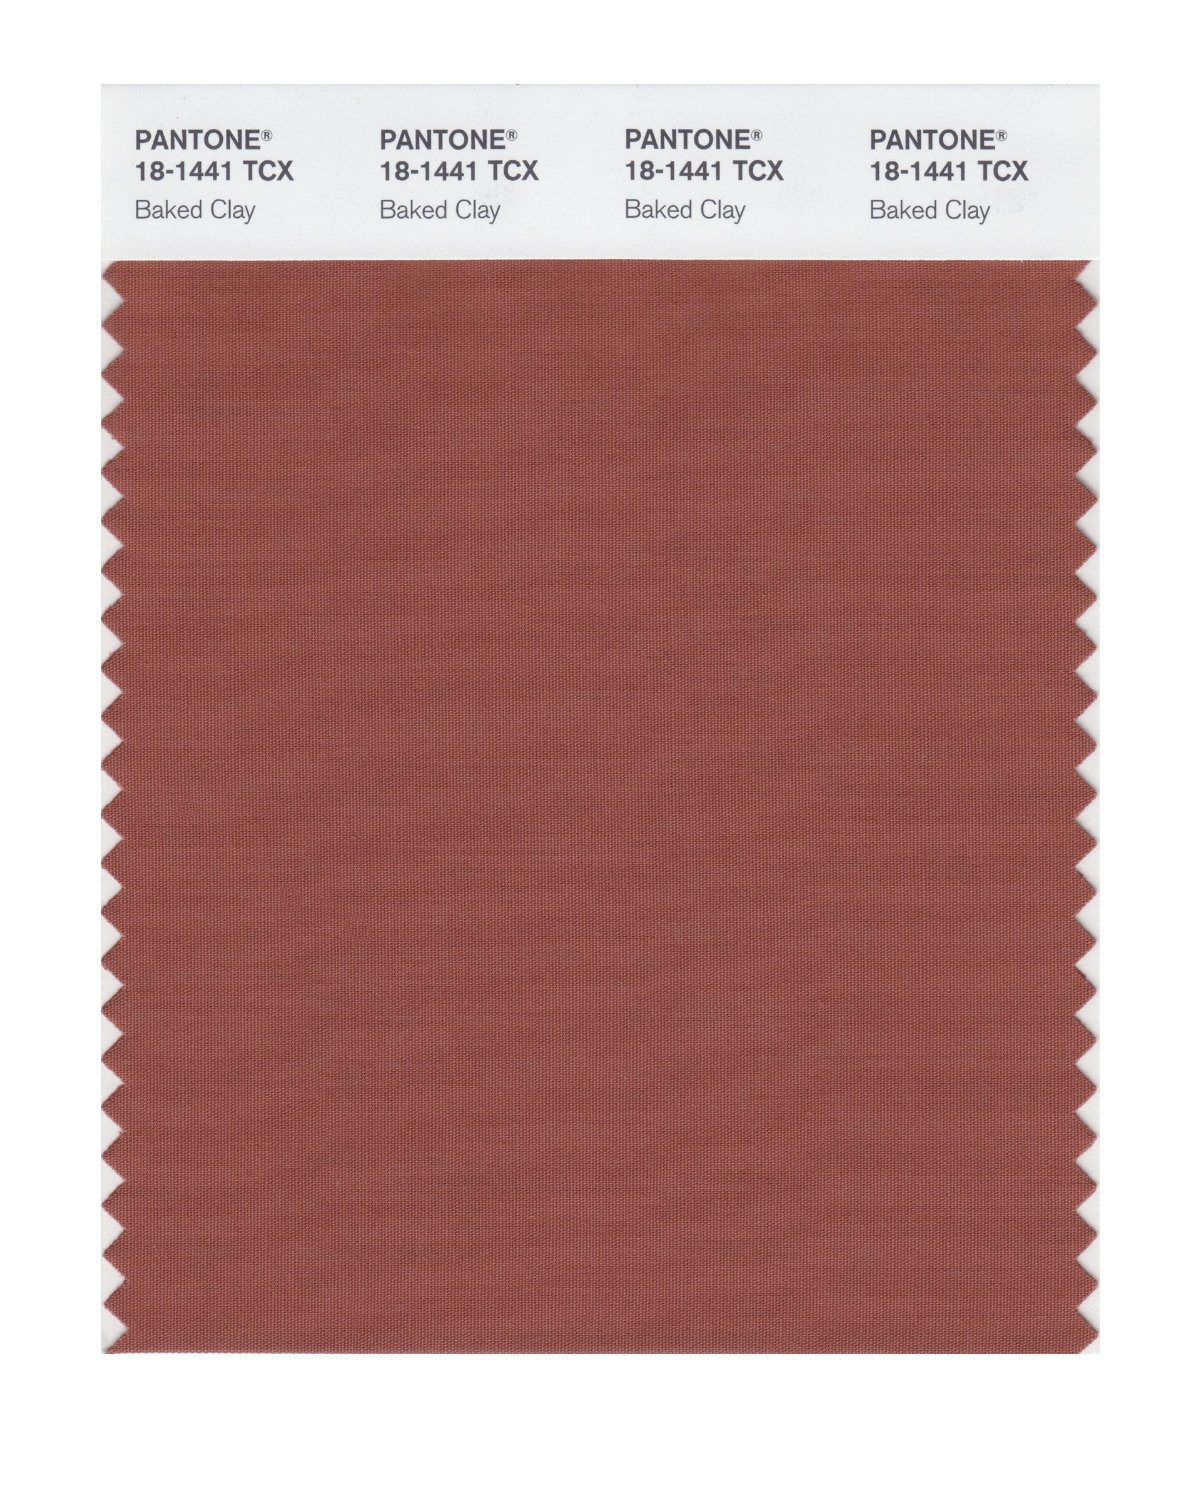 Pantone Cotton Swatch 18-1441 Baked Clay